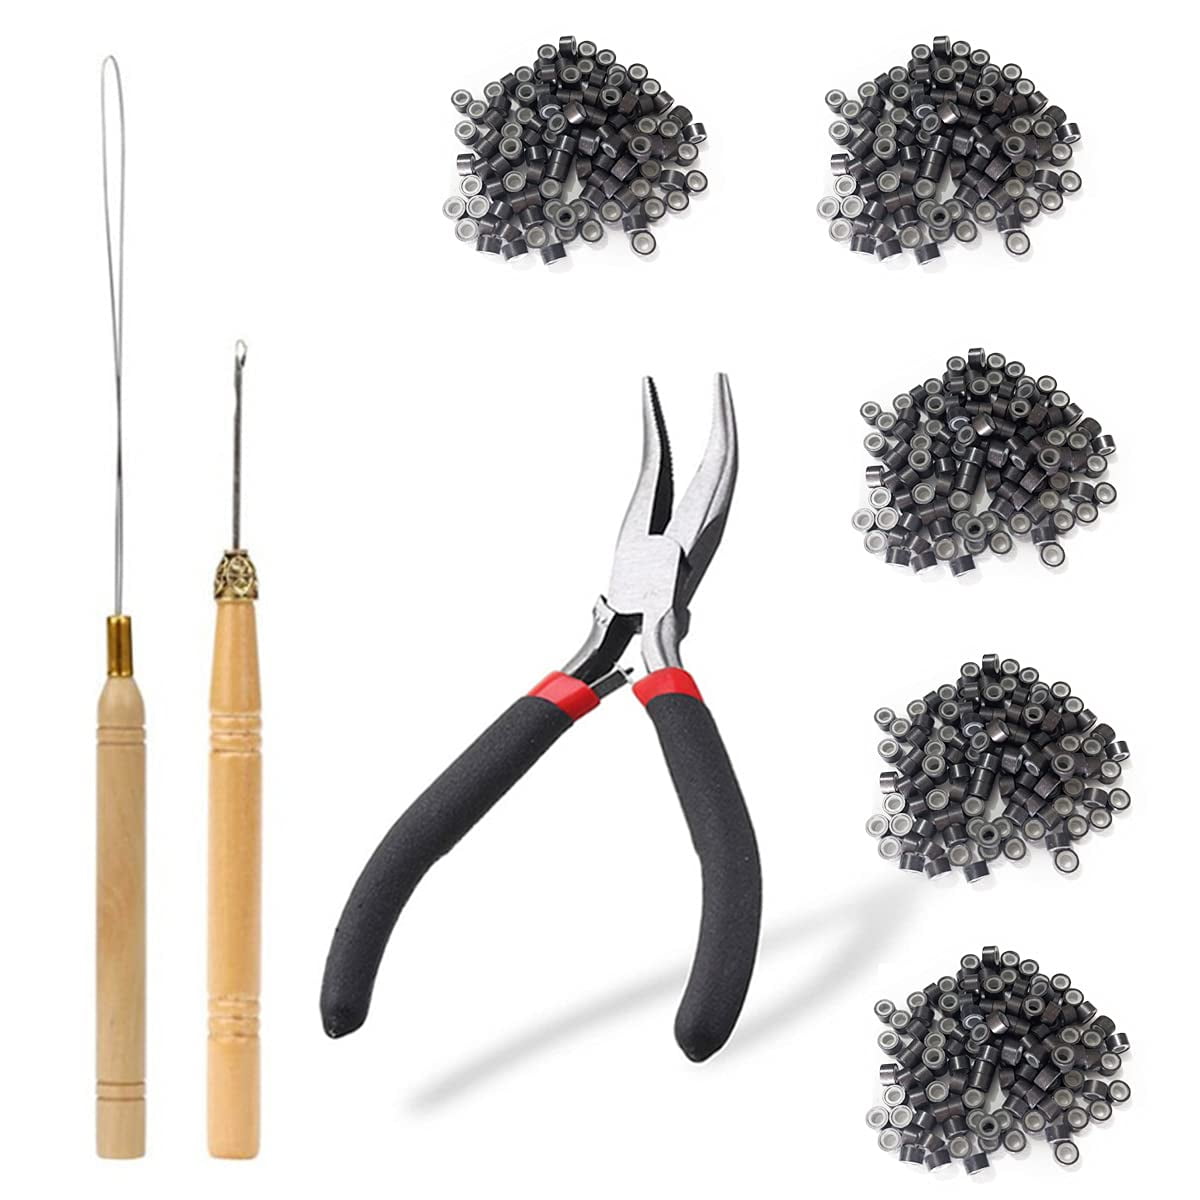 Hair Extension Tools Kit, Bead Device Tool, 1pc Curved Tip Hair Plier, 1pc  Pulling Hook For Tinsel And Feather Hair Extensions Or Removal